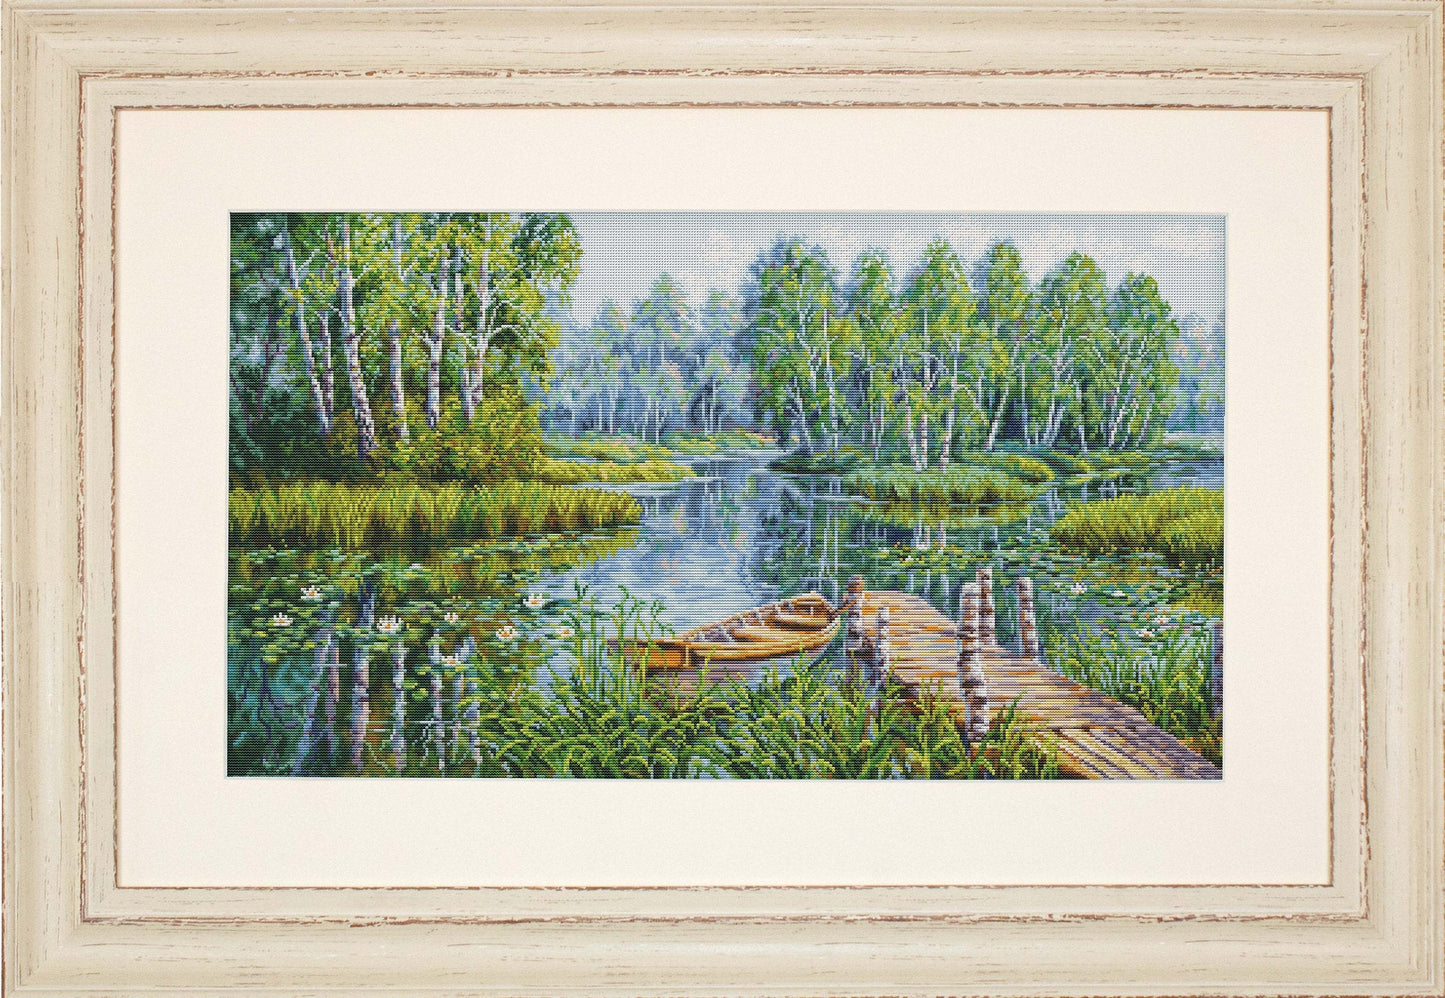 Cross Stitch Kit Luca-S - Birches at the Edge of the Lake, BU5012